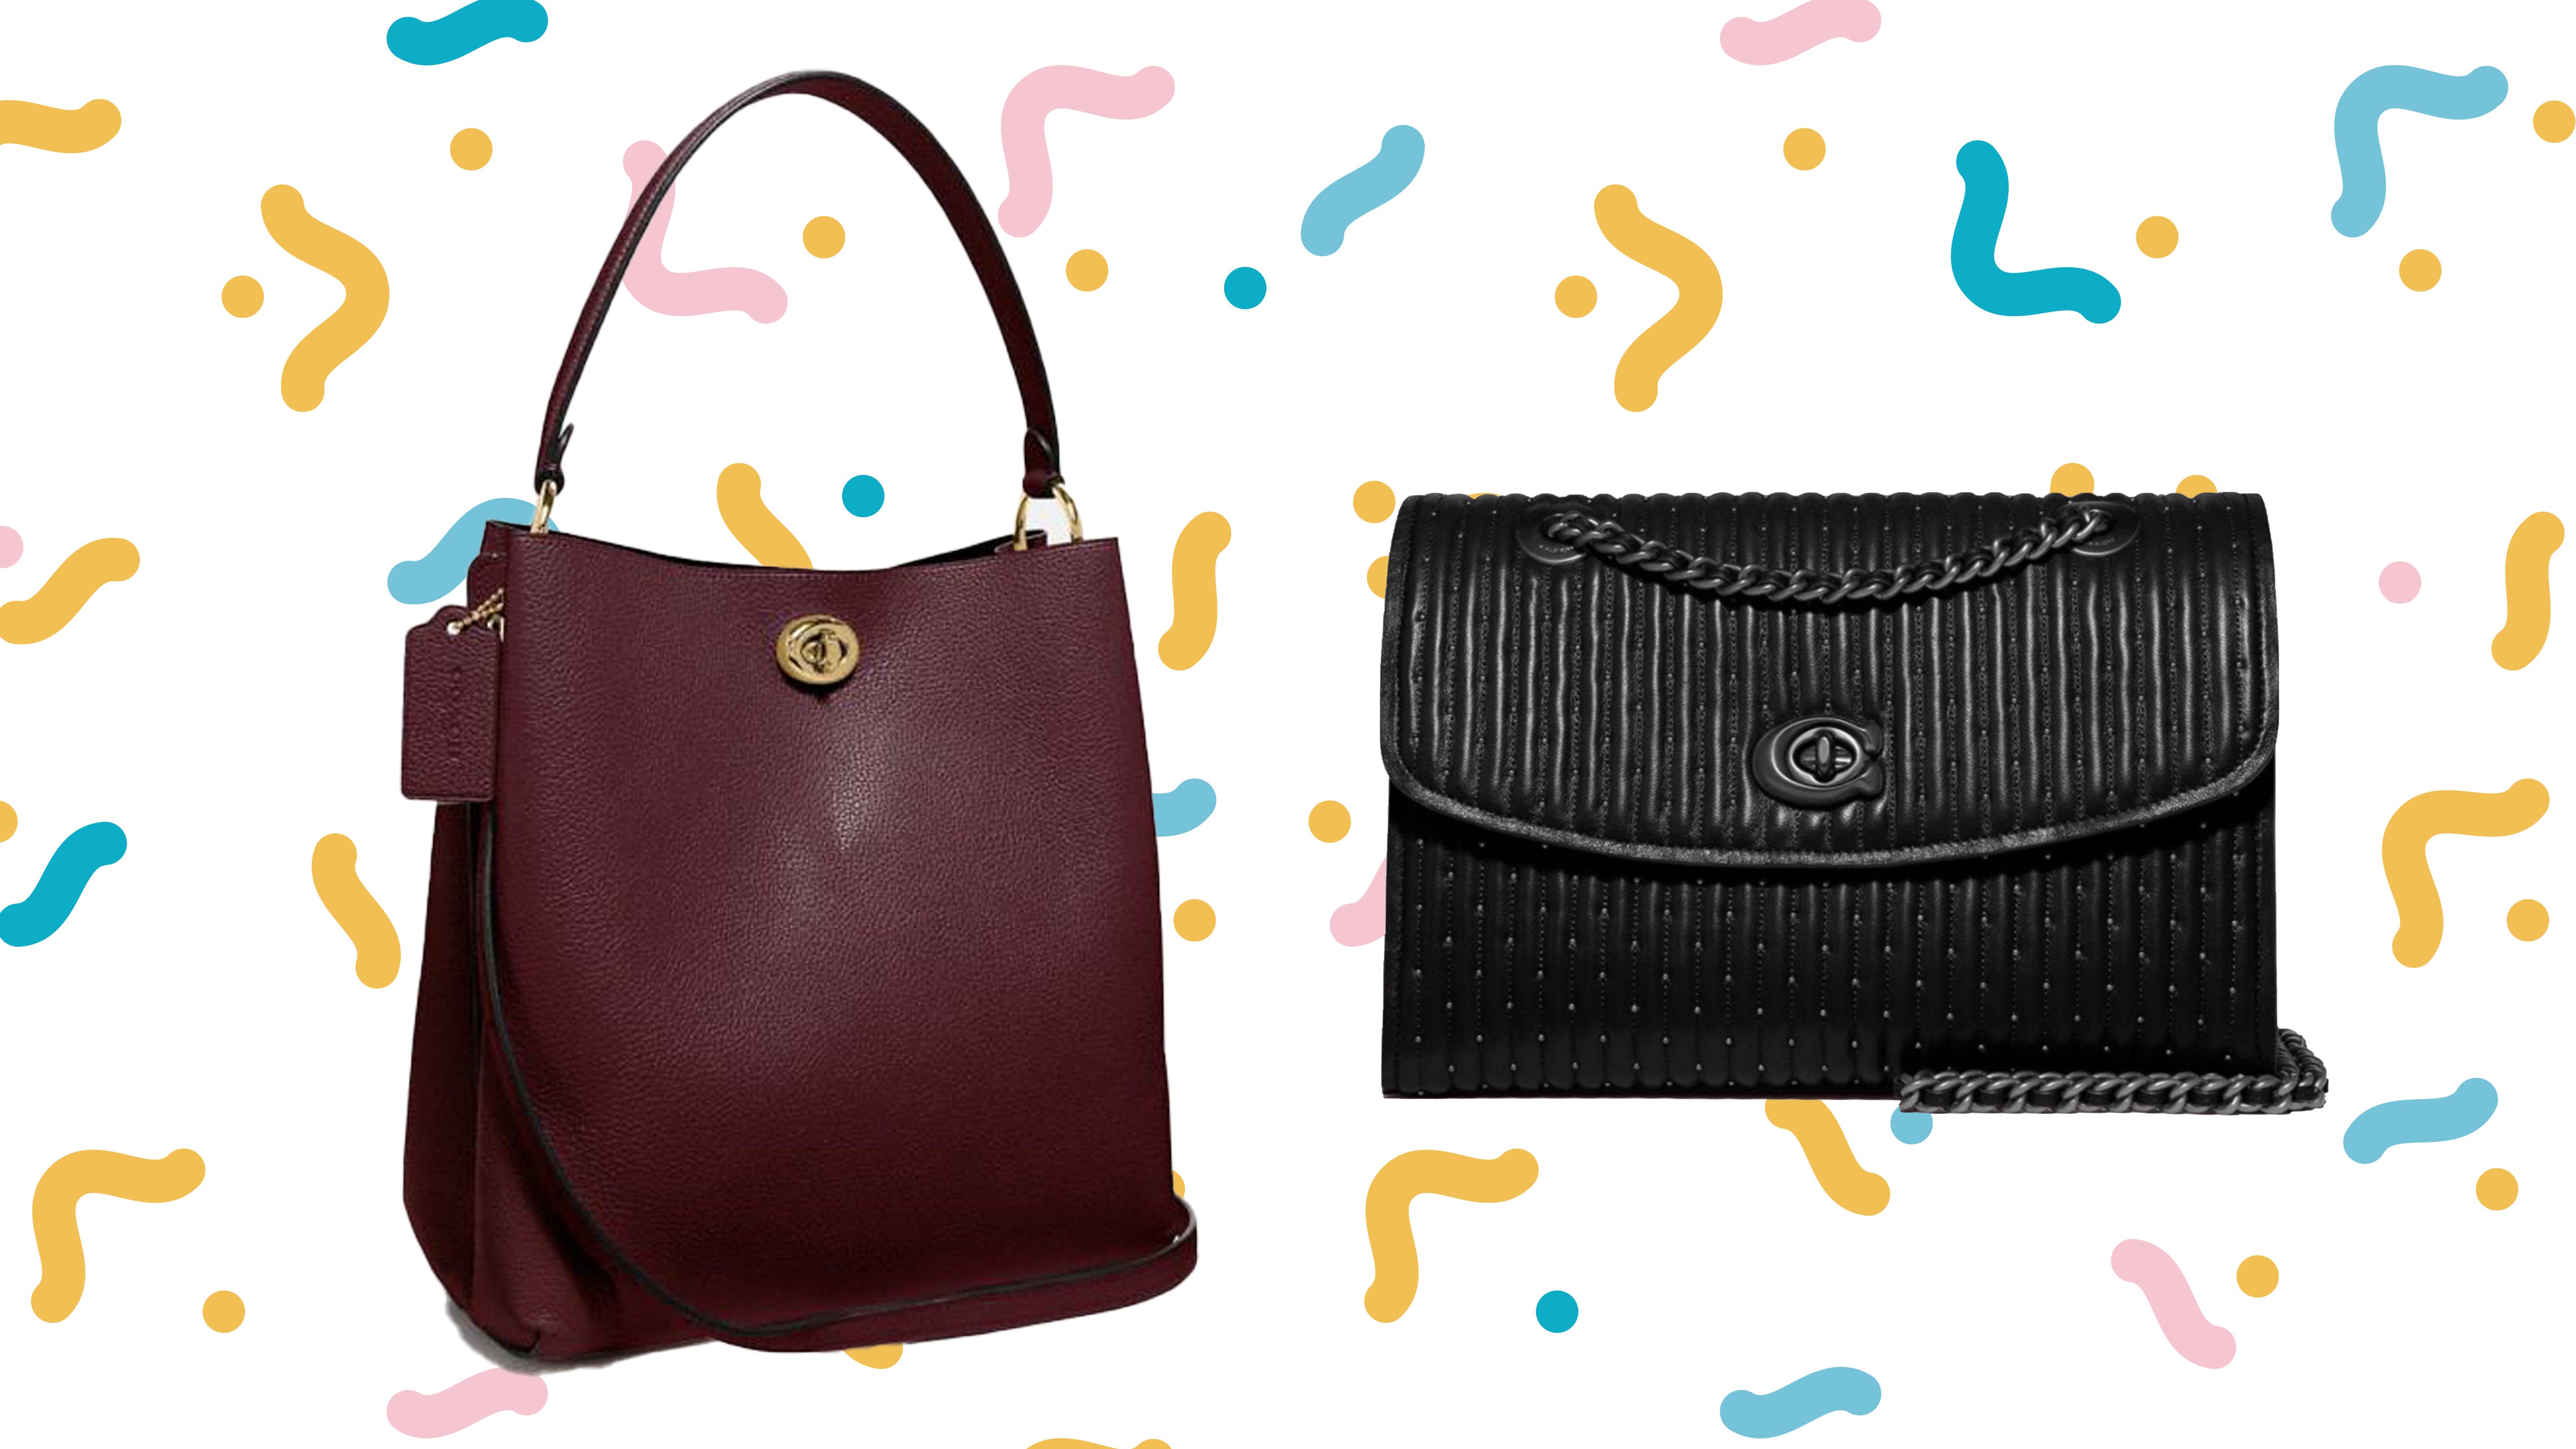 Coach bags are at some of their best prices yet thanks to this rare coupon code